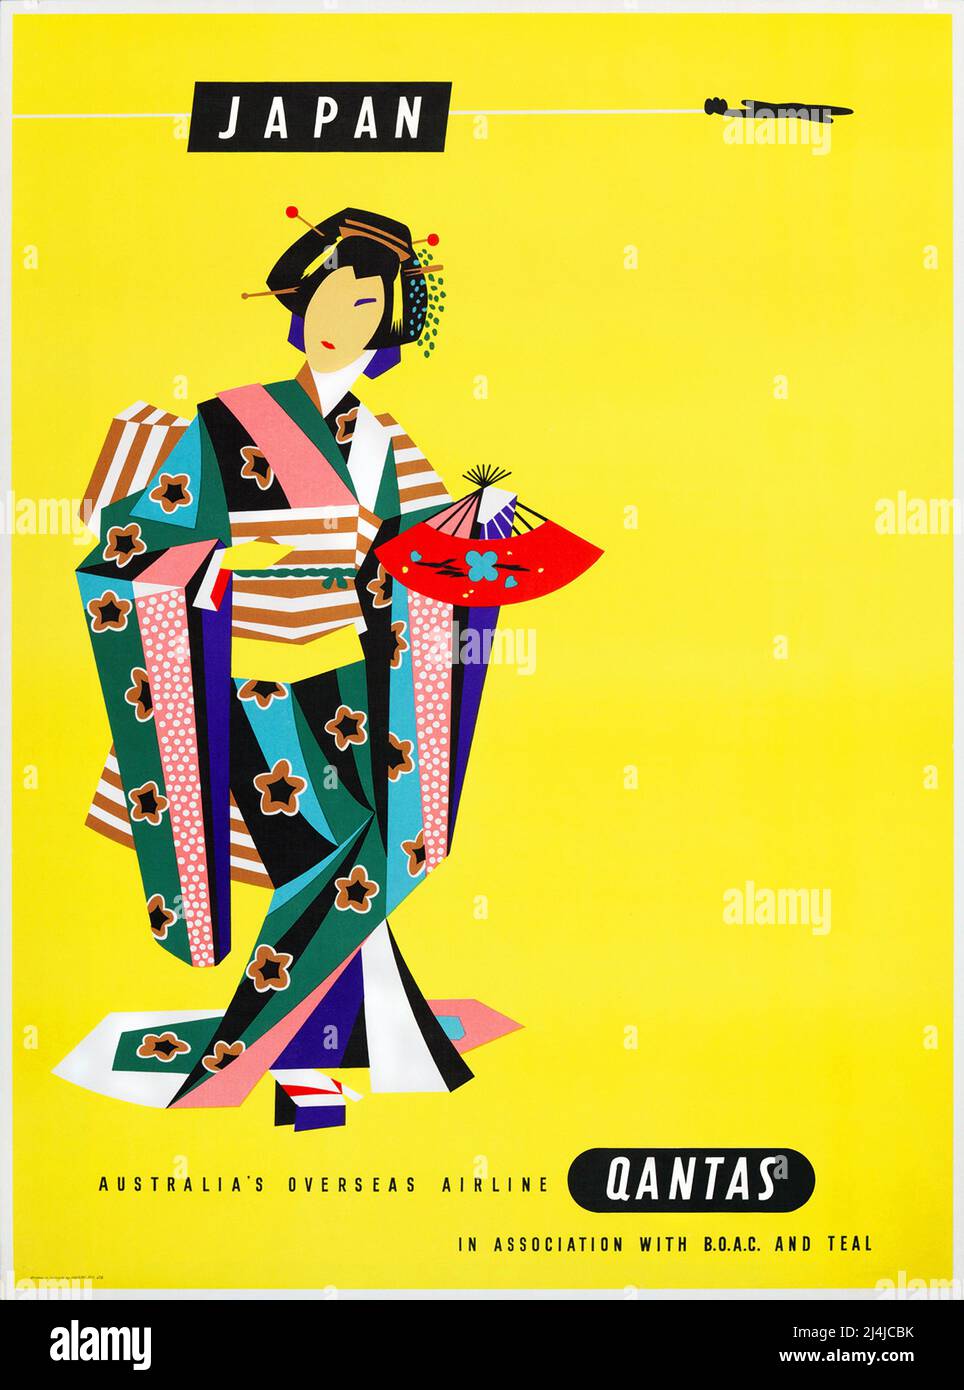 Vintage Travel Poster - Qantas - Japan , By Harry Rogers Stock Photo